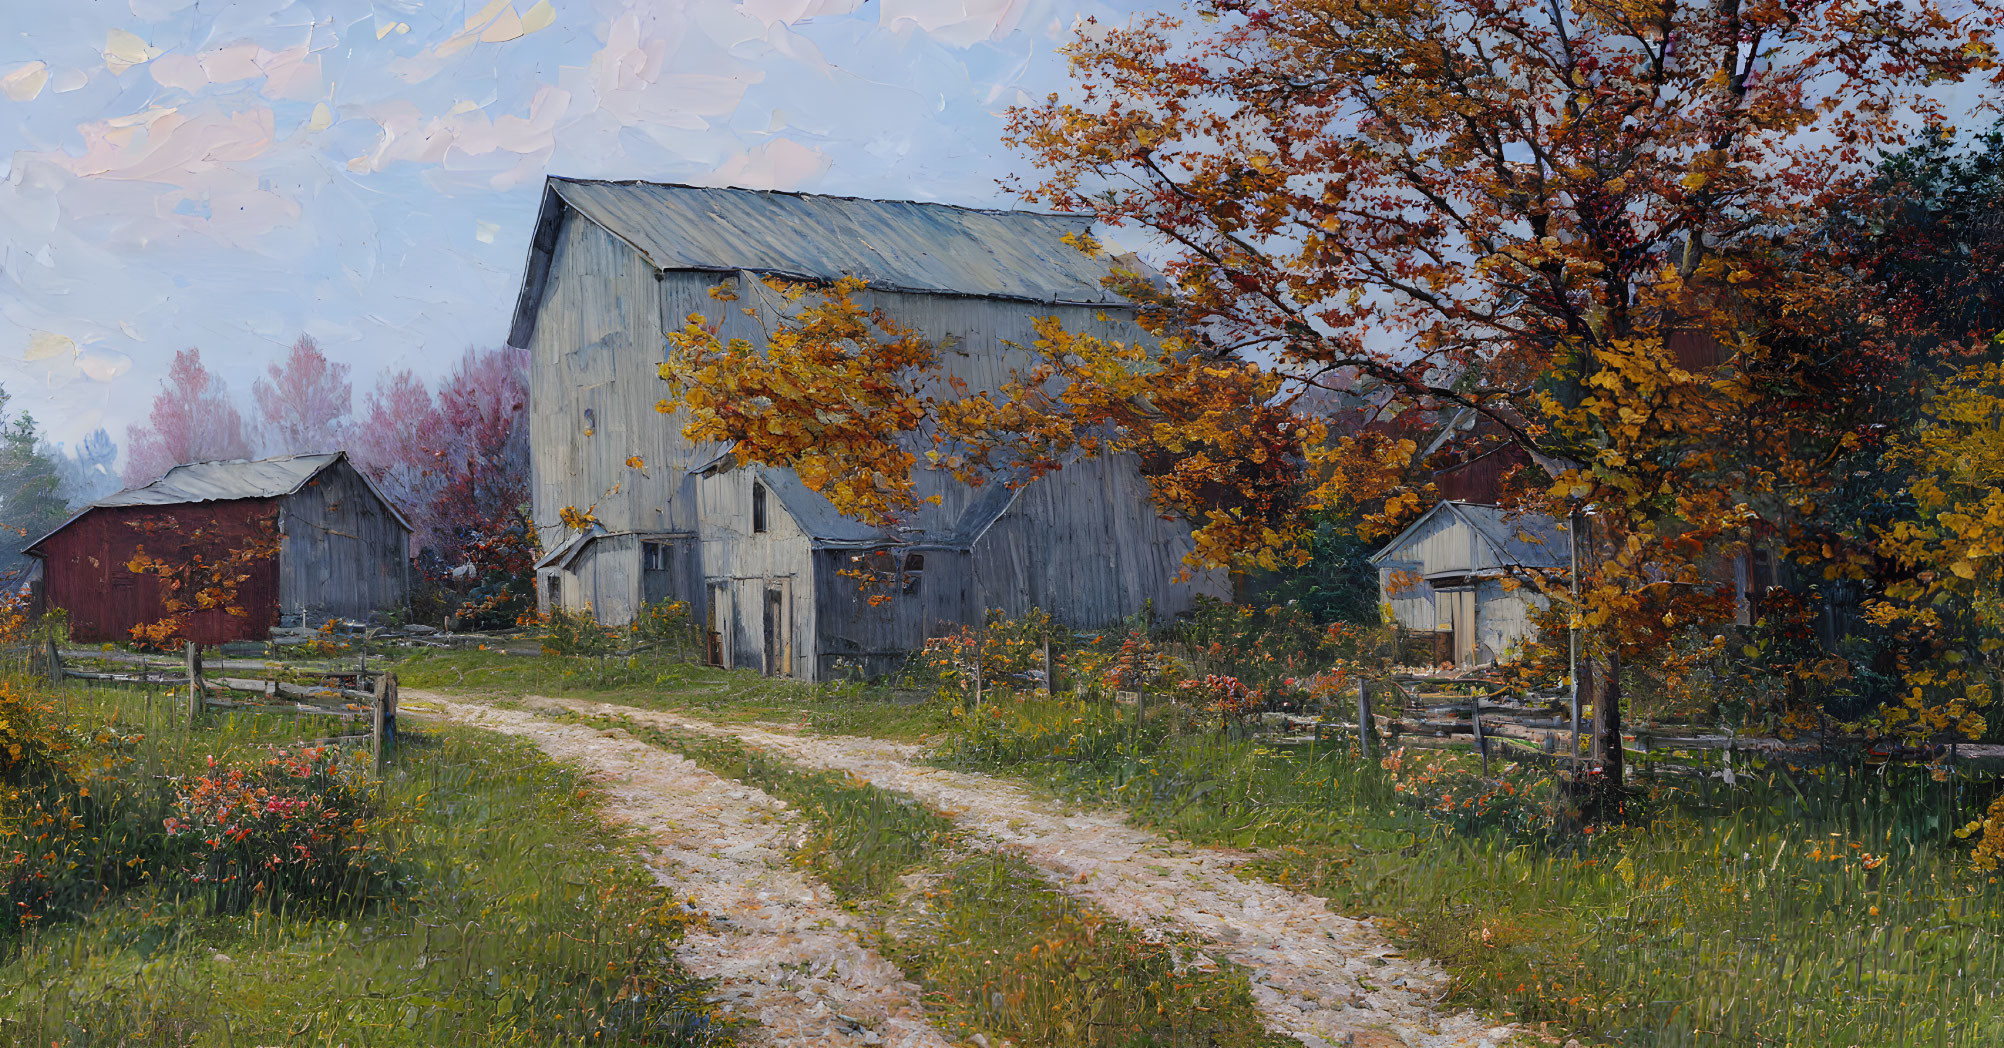 Scenic rustic barn with autumn trees and wildflowers